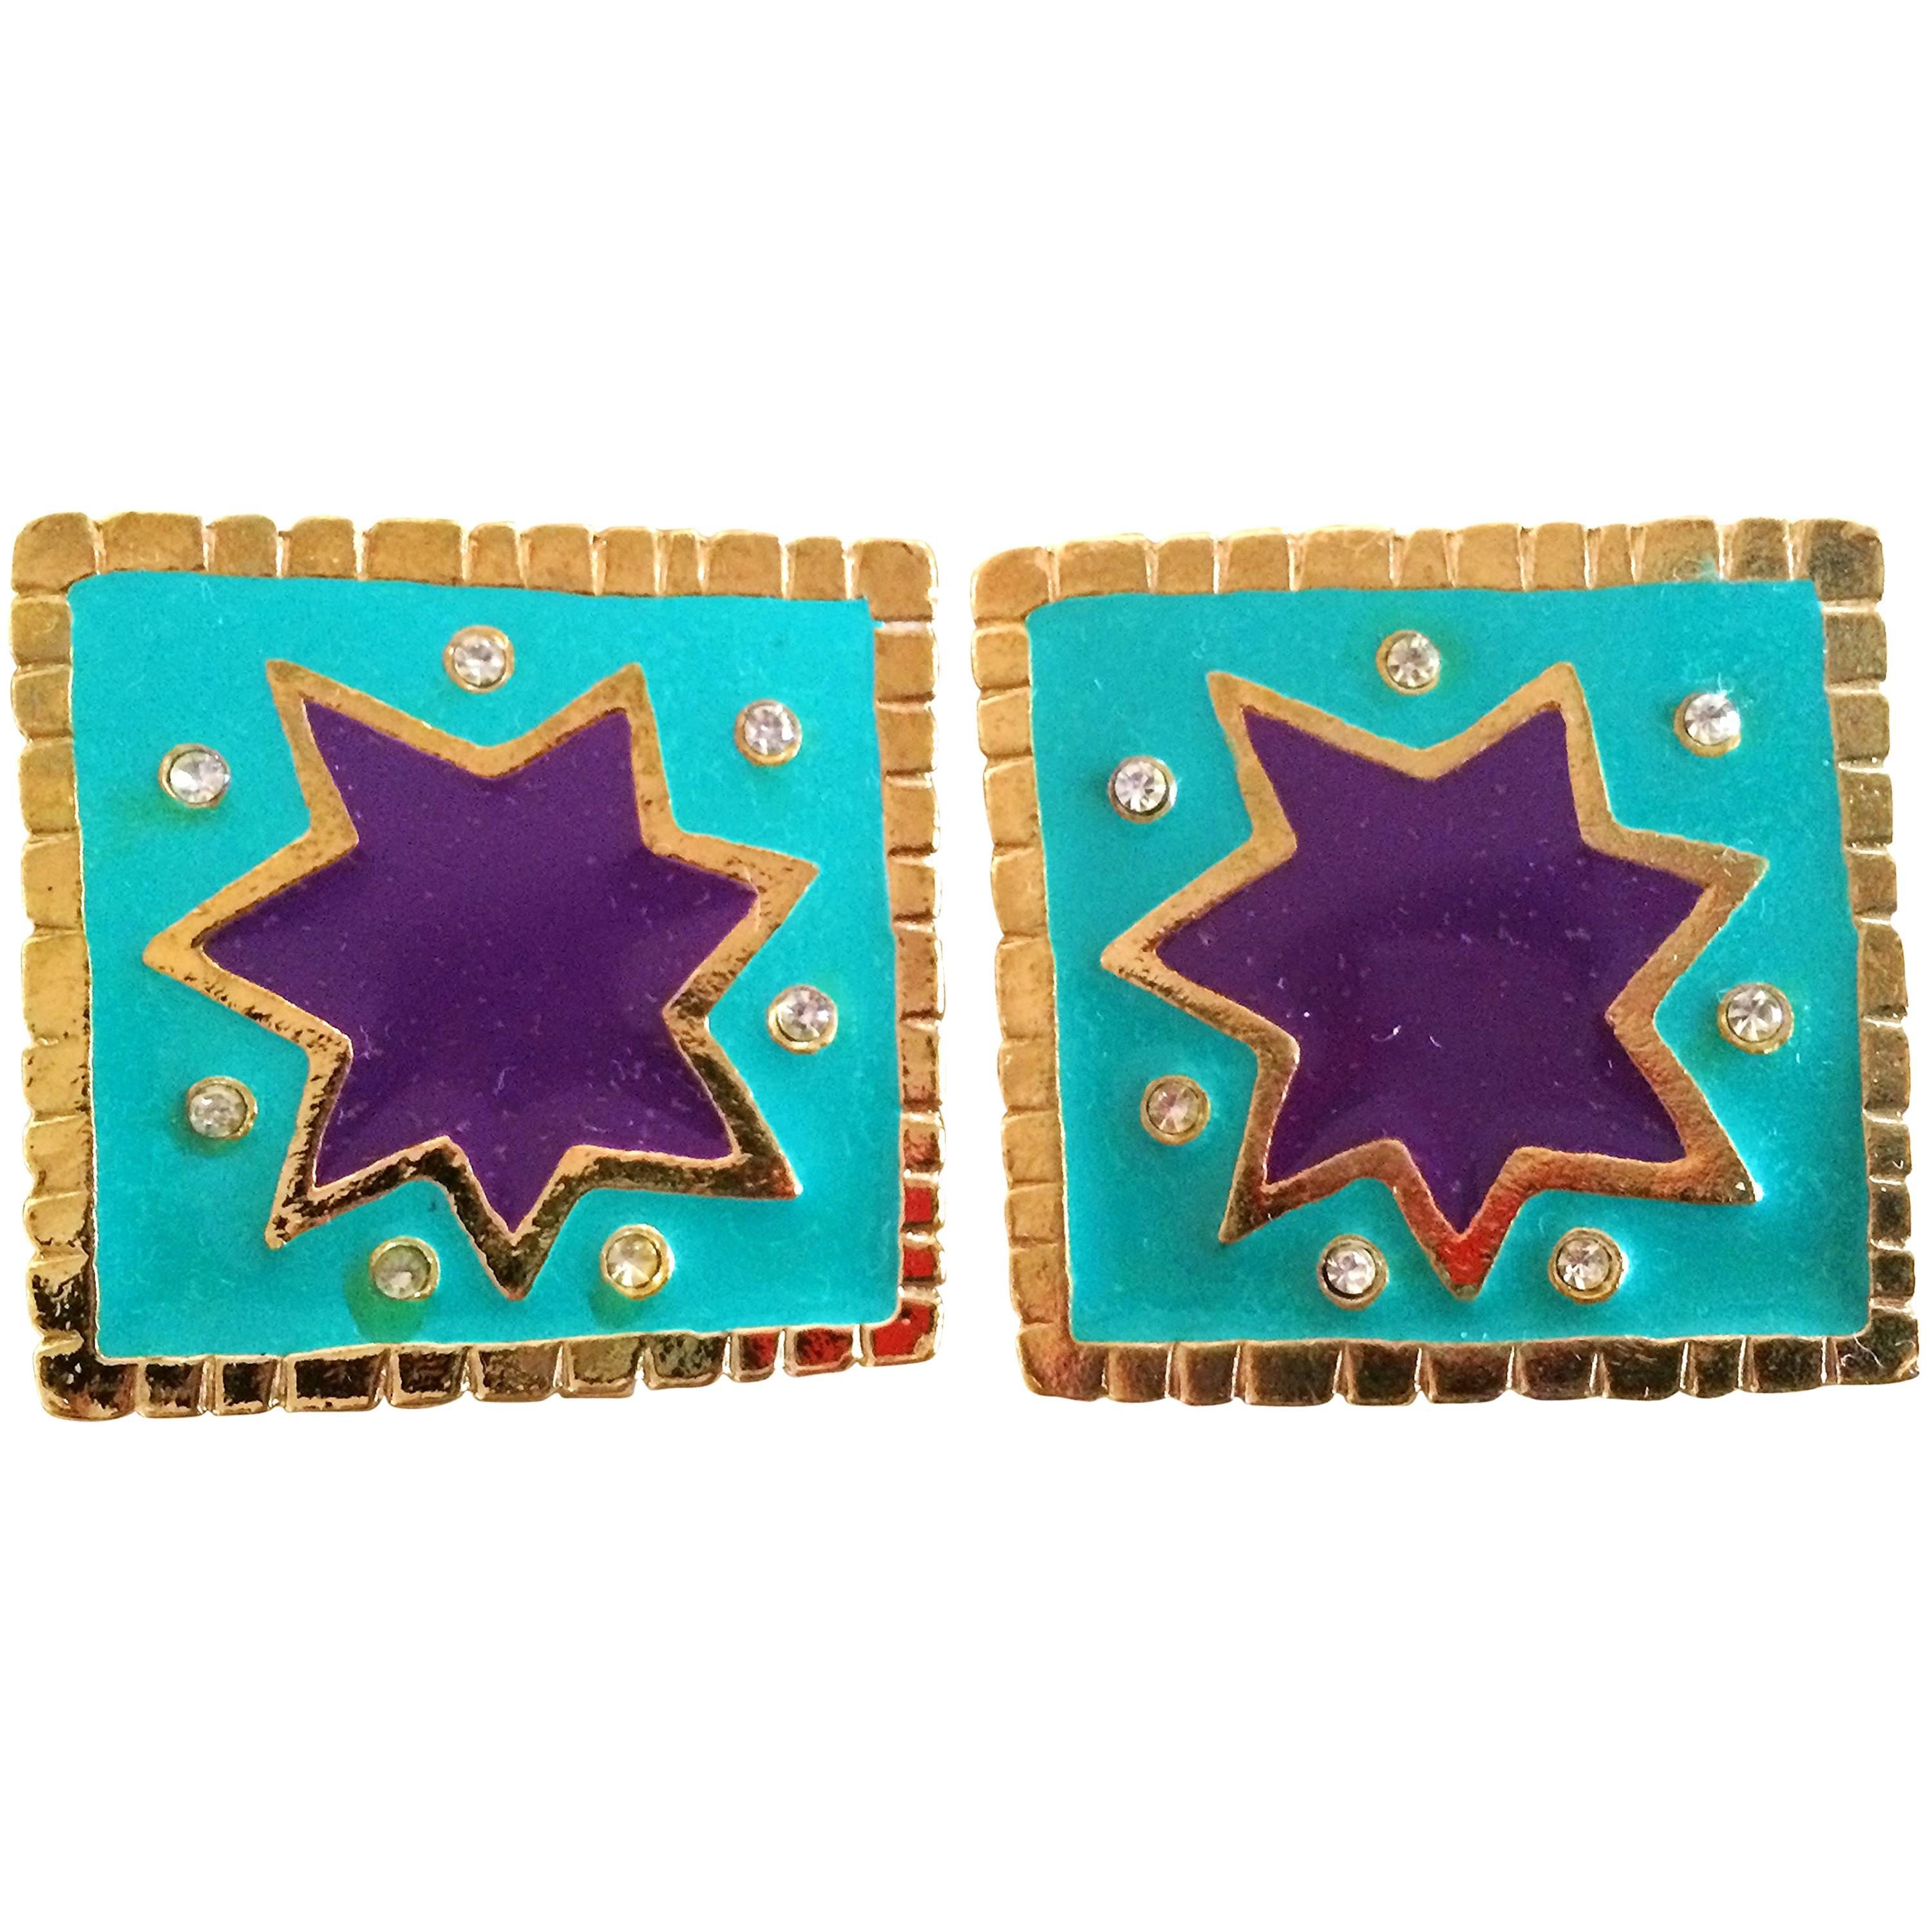 Vintage Christian Lacroix blue and purple enamel large square earrings, crystals For Sale